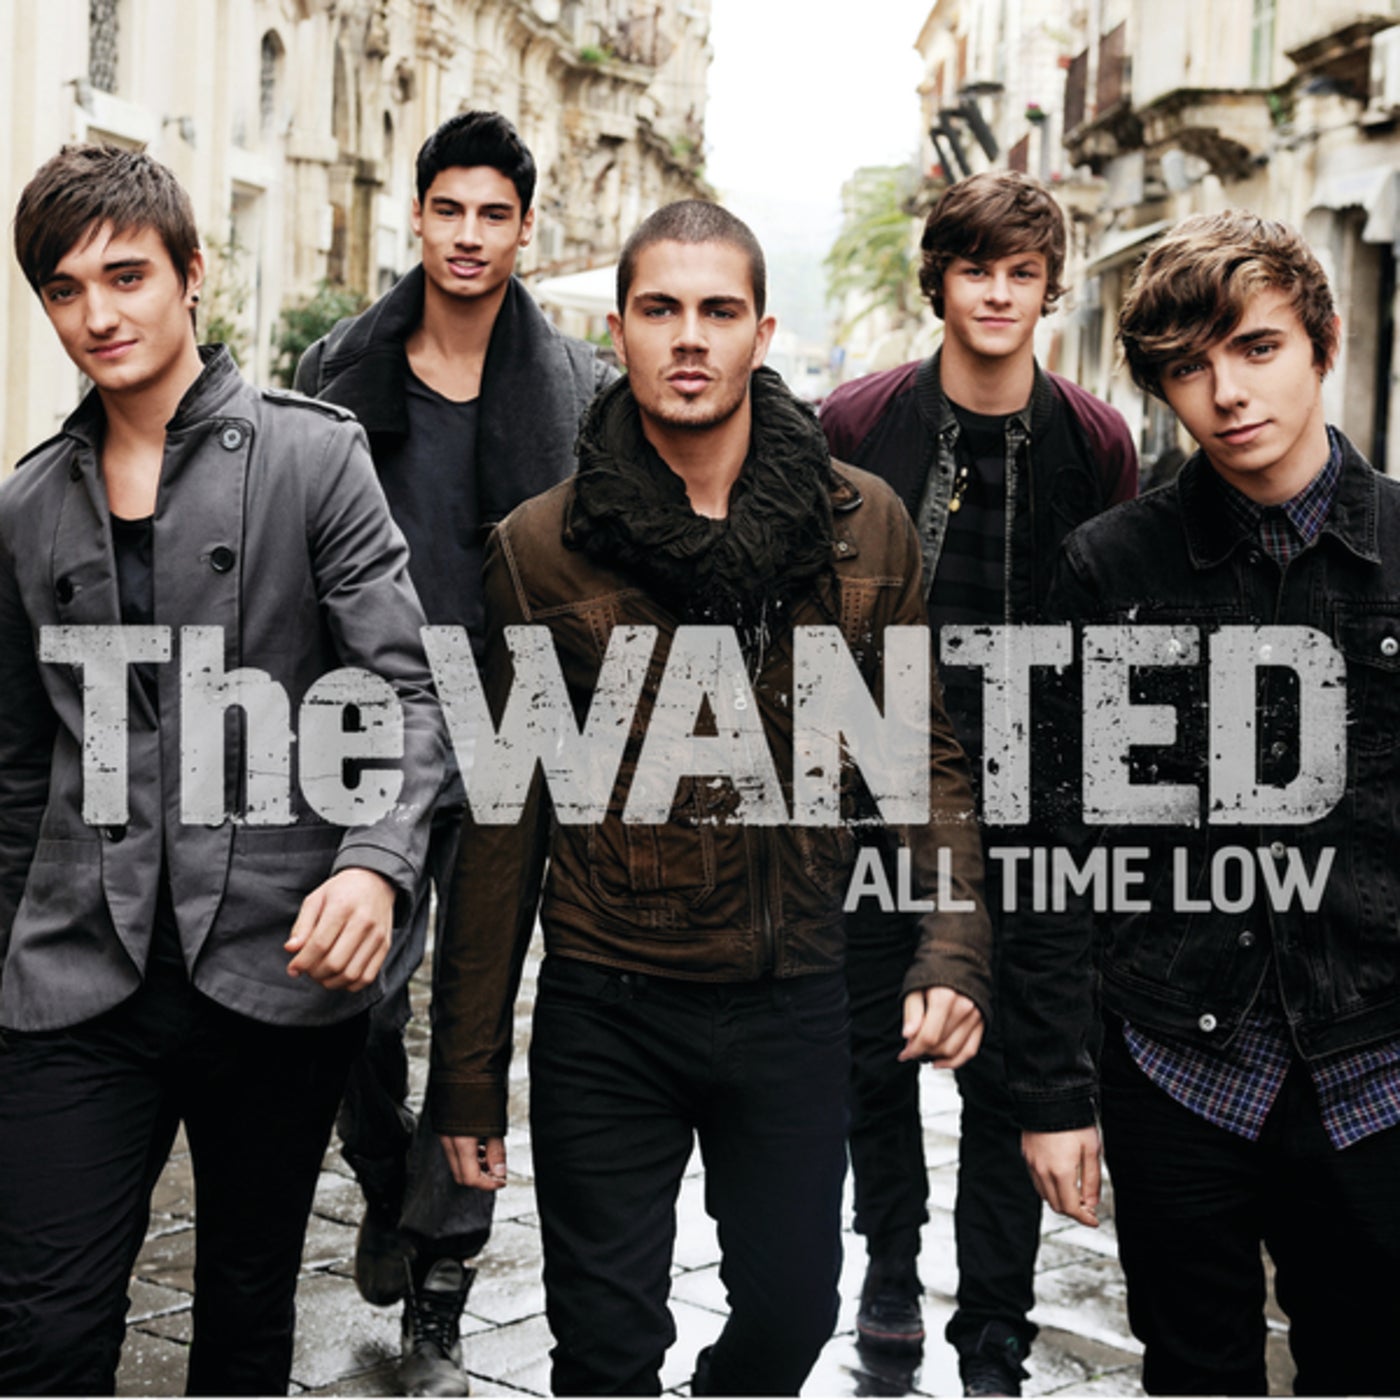 Wanted chasing. The wanted Band. Want. The wanted all time Low. Группа all time Low.